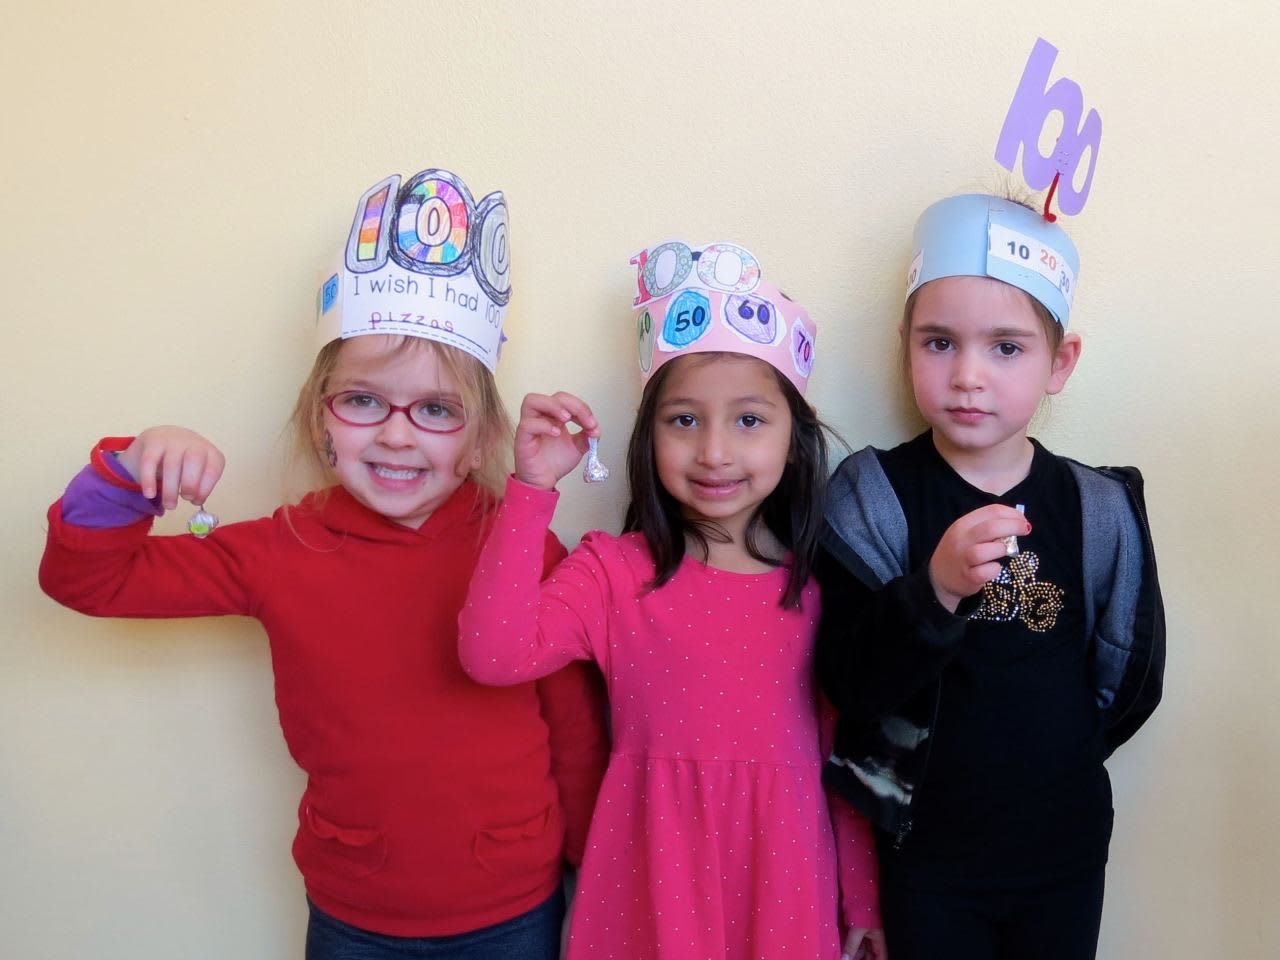 Briarcliff Manor’s Todd Elementary School kindergartners celebrated the 100th day of school with a number of “100”-themed activities throughout the day.